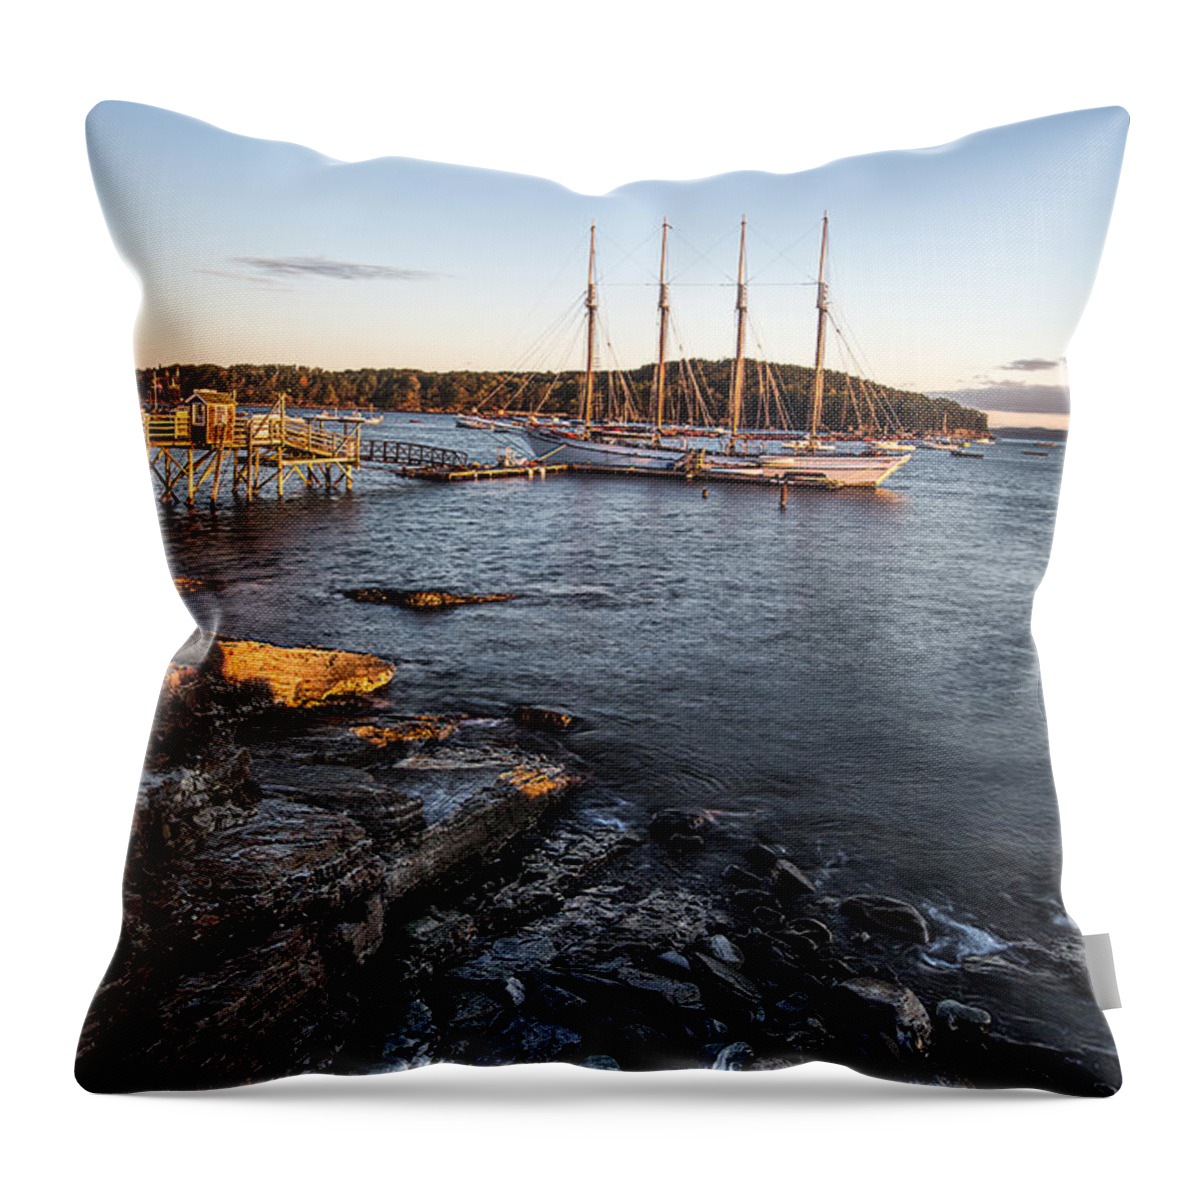 Vertical Throw Pillow featuring the photograph A Ship by Jon Glaser